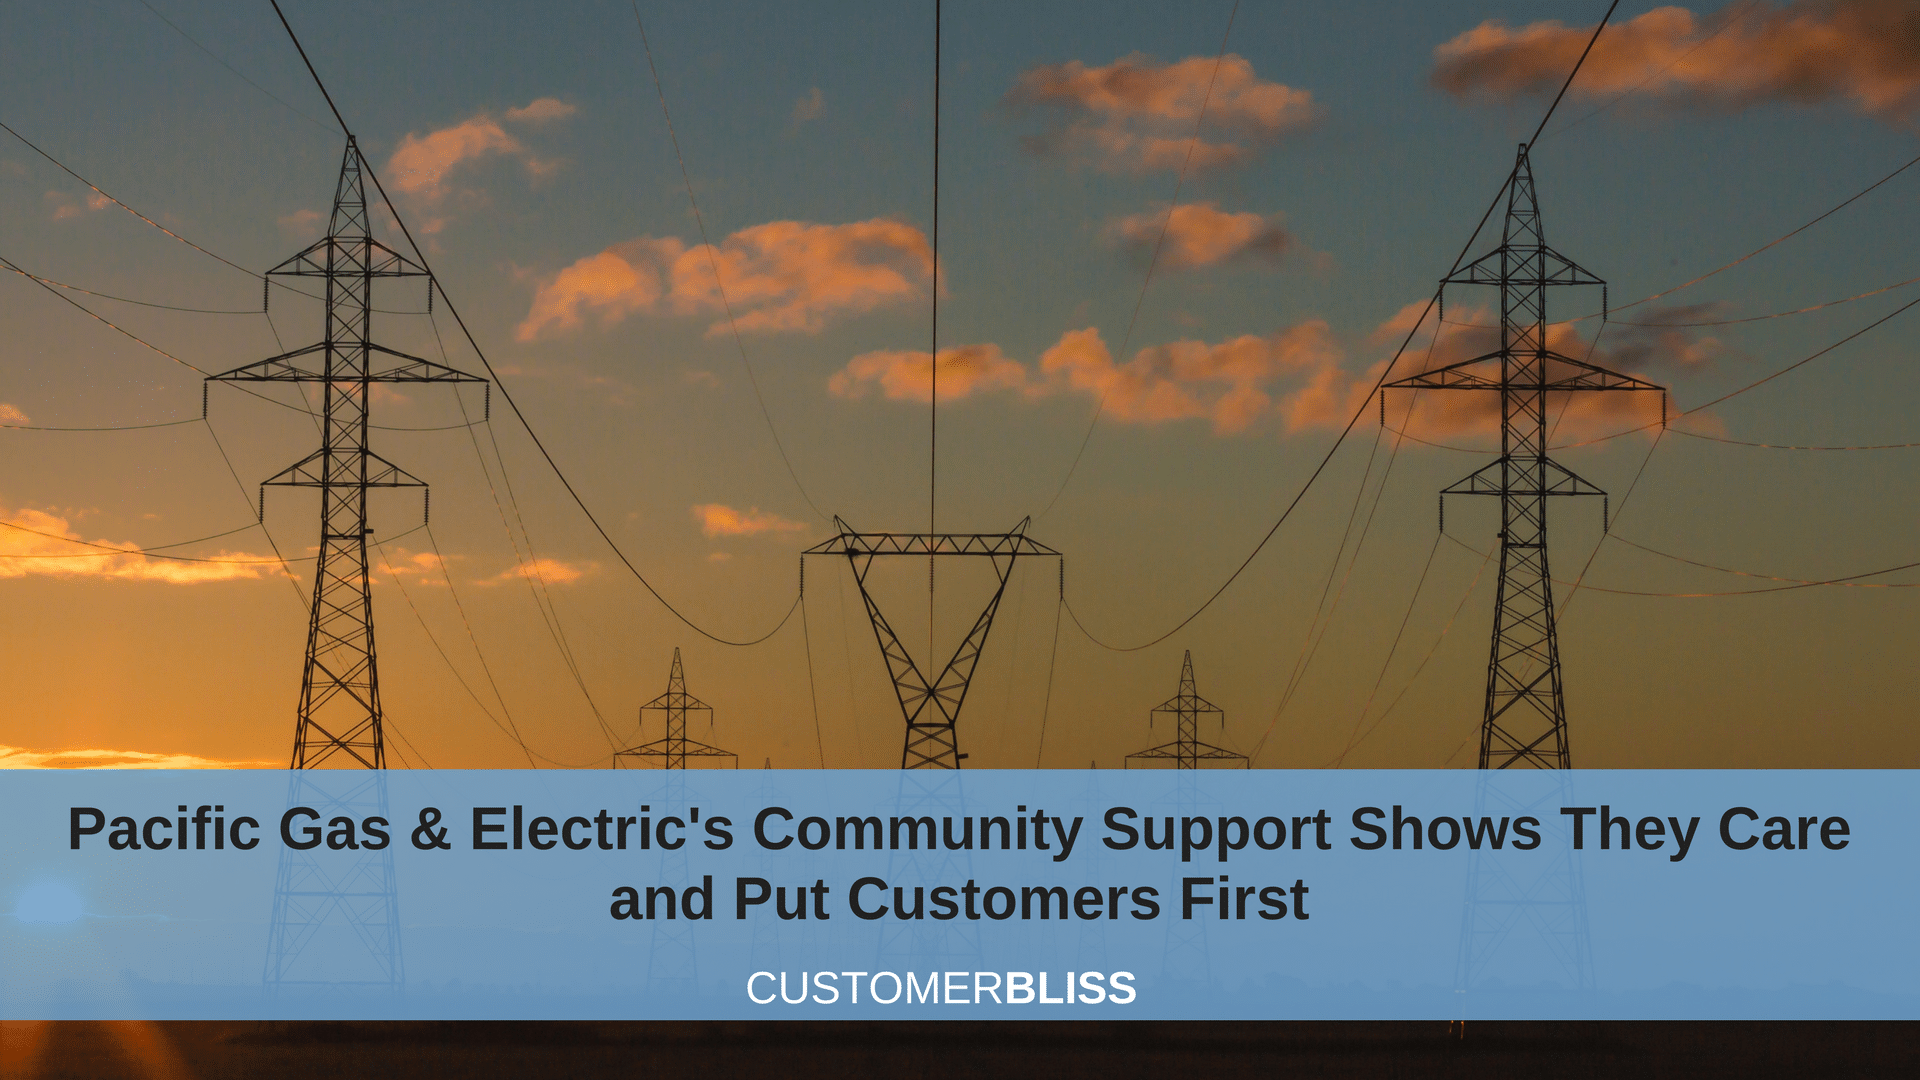 Pacific Gas & Electric's Community Support Shows They Care and Put Customers First